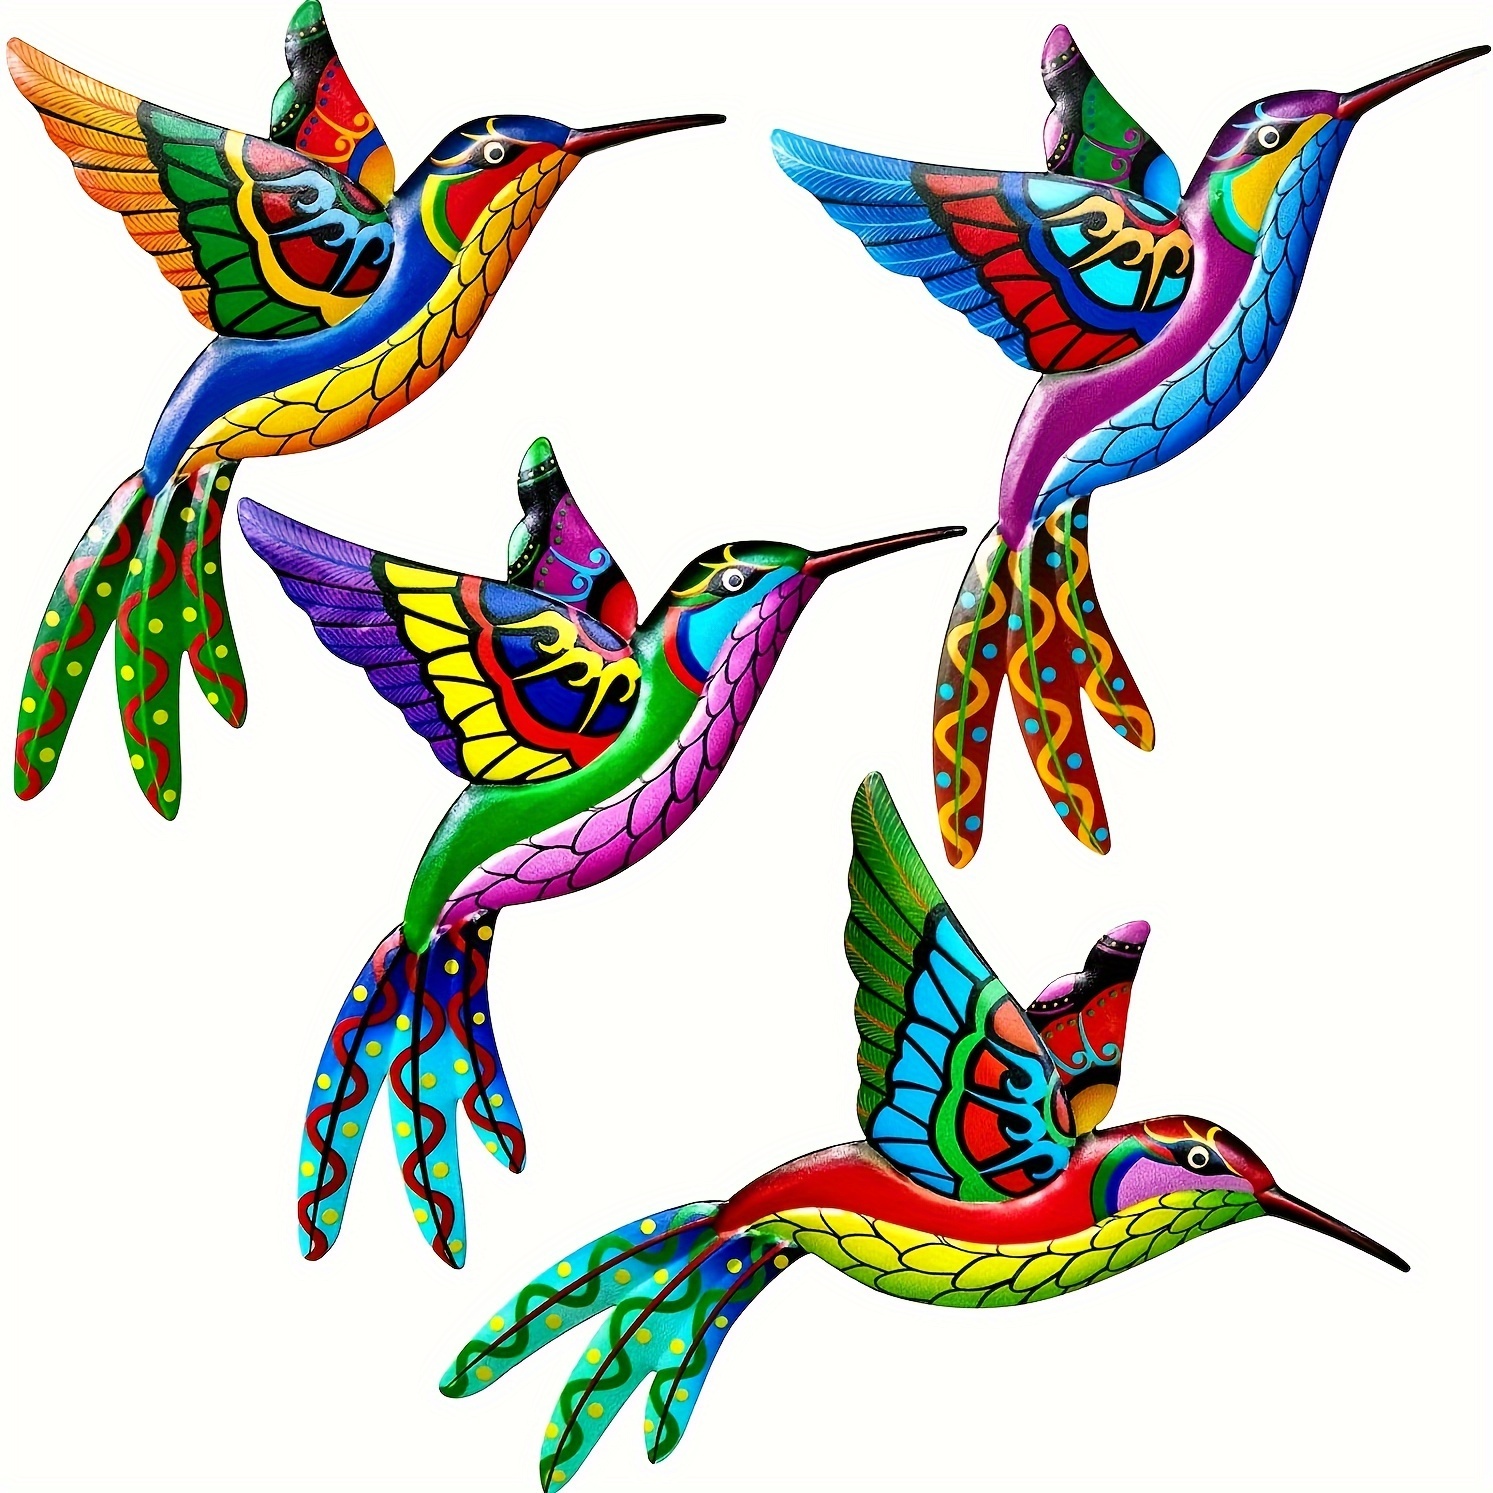 

4pcs, Colorful Metal Hummingbird Wall Decor - 3d Birds Wall Sculpture For Outdoor & Indoor Use - Handmade Gift For Garden, Patio, Living Room & Fence Decoration